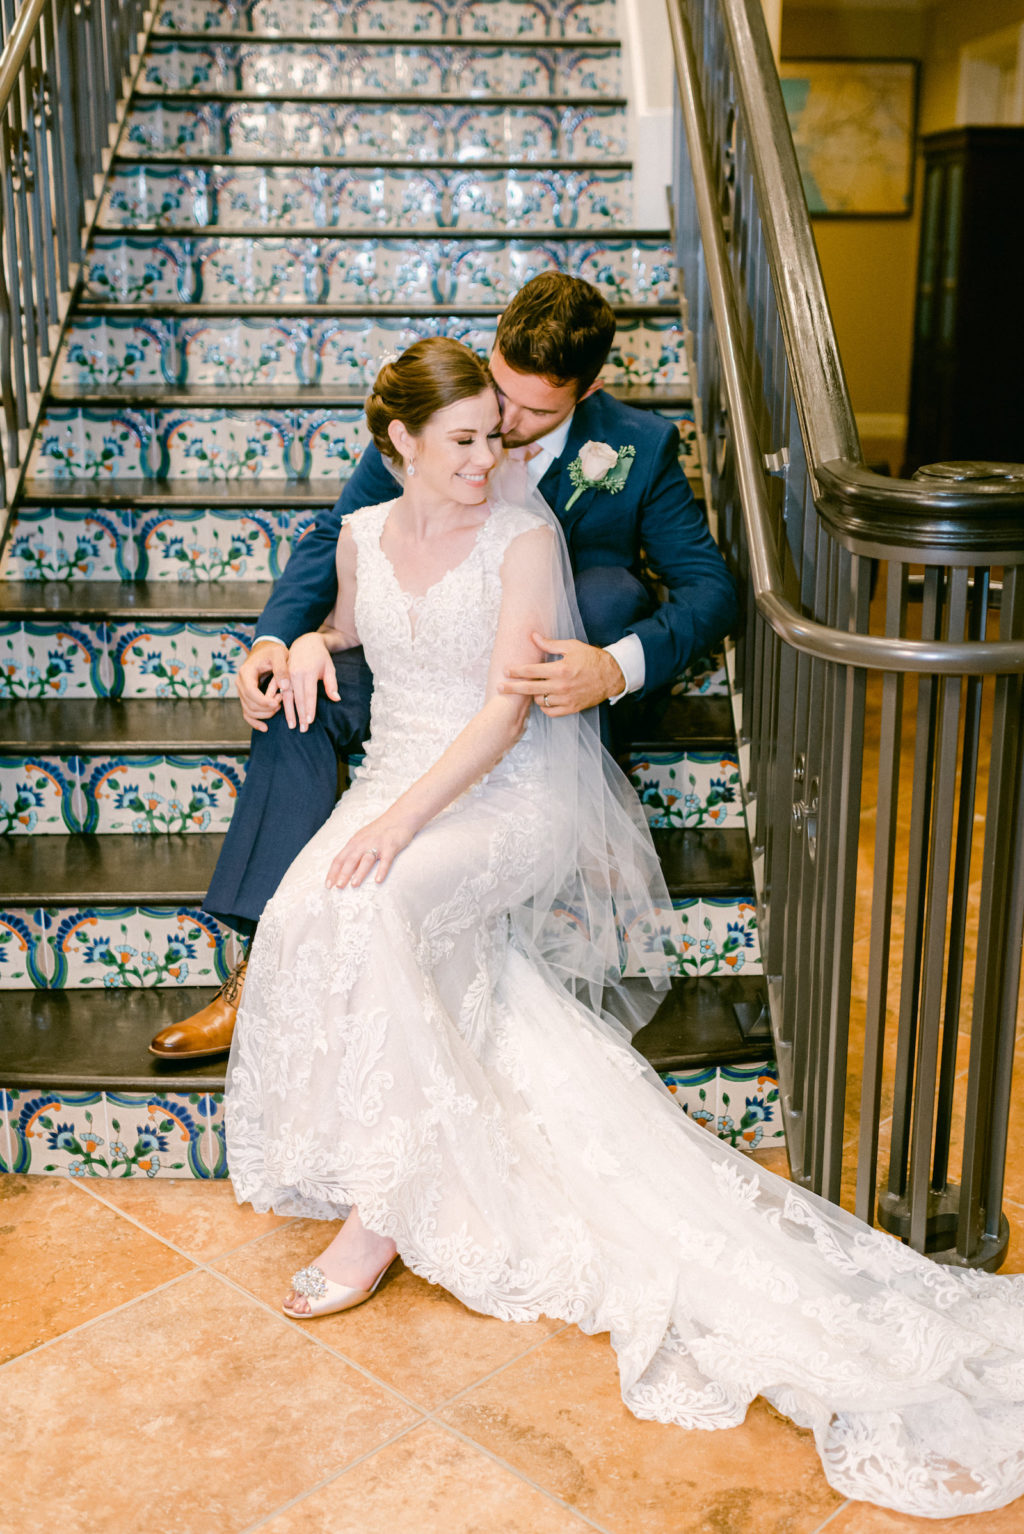 Tampa Bride and Groom Sitting on Fun Colorful Staircase